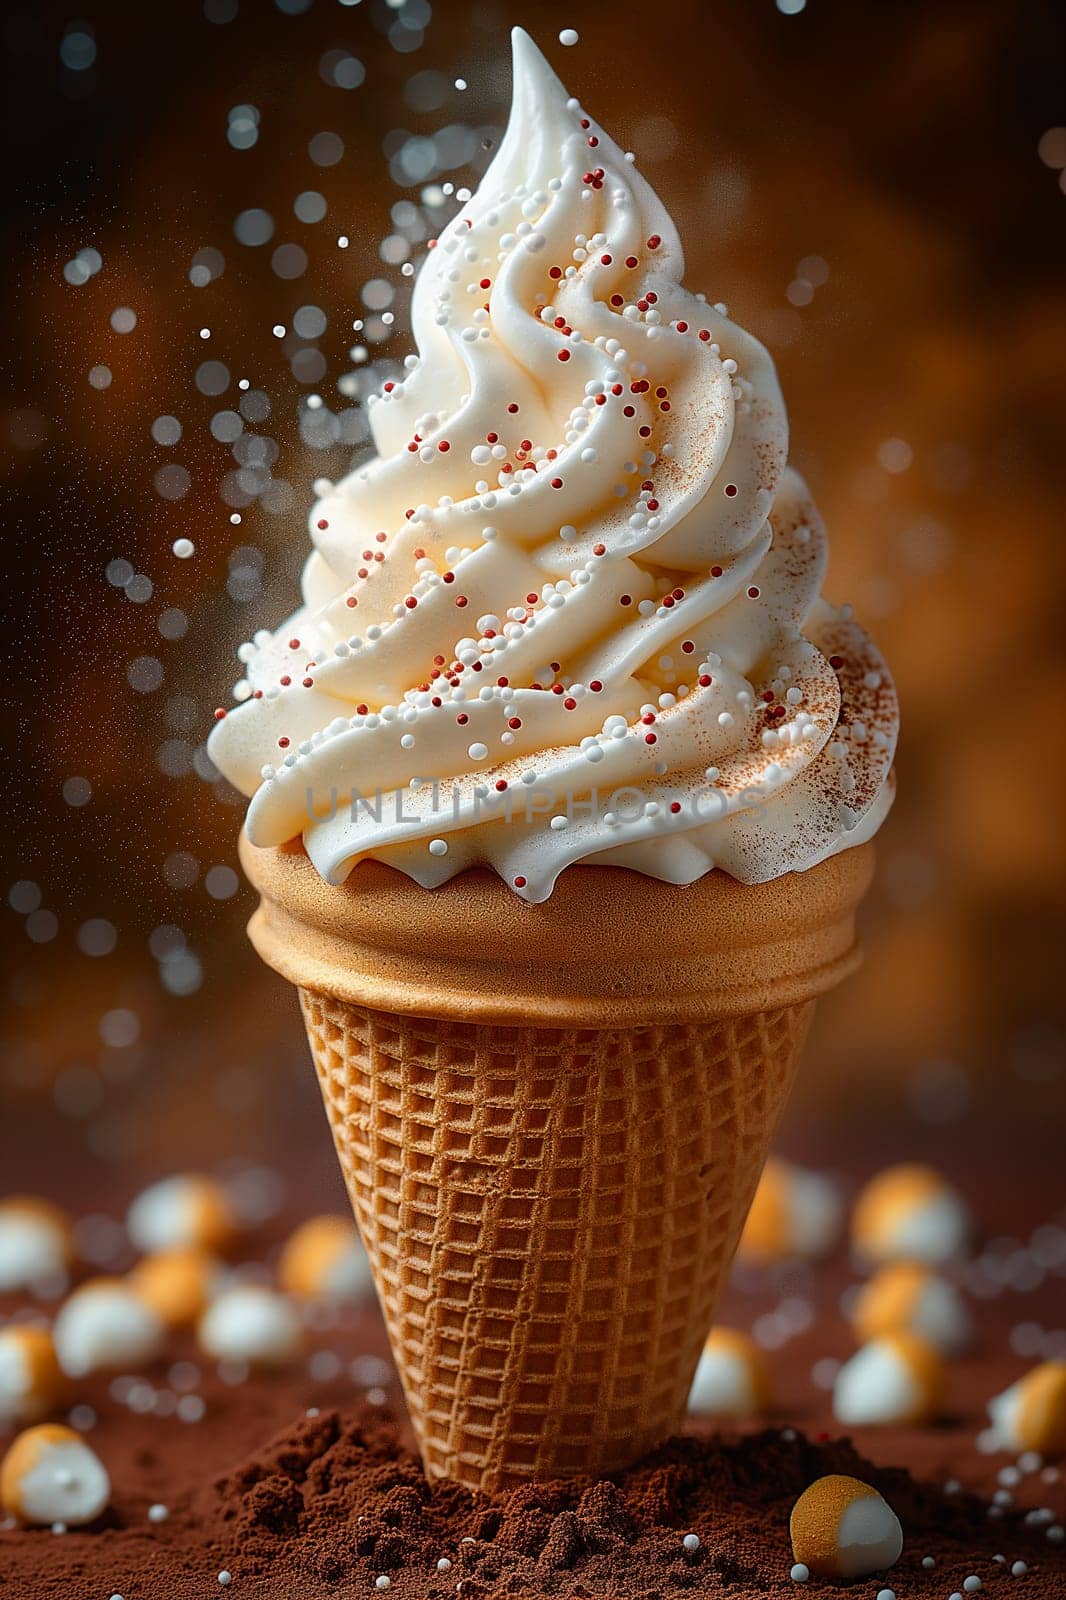 A single scoop of vanilla ice cream on a waffle cone. by Hype2art